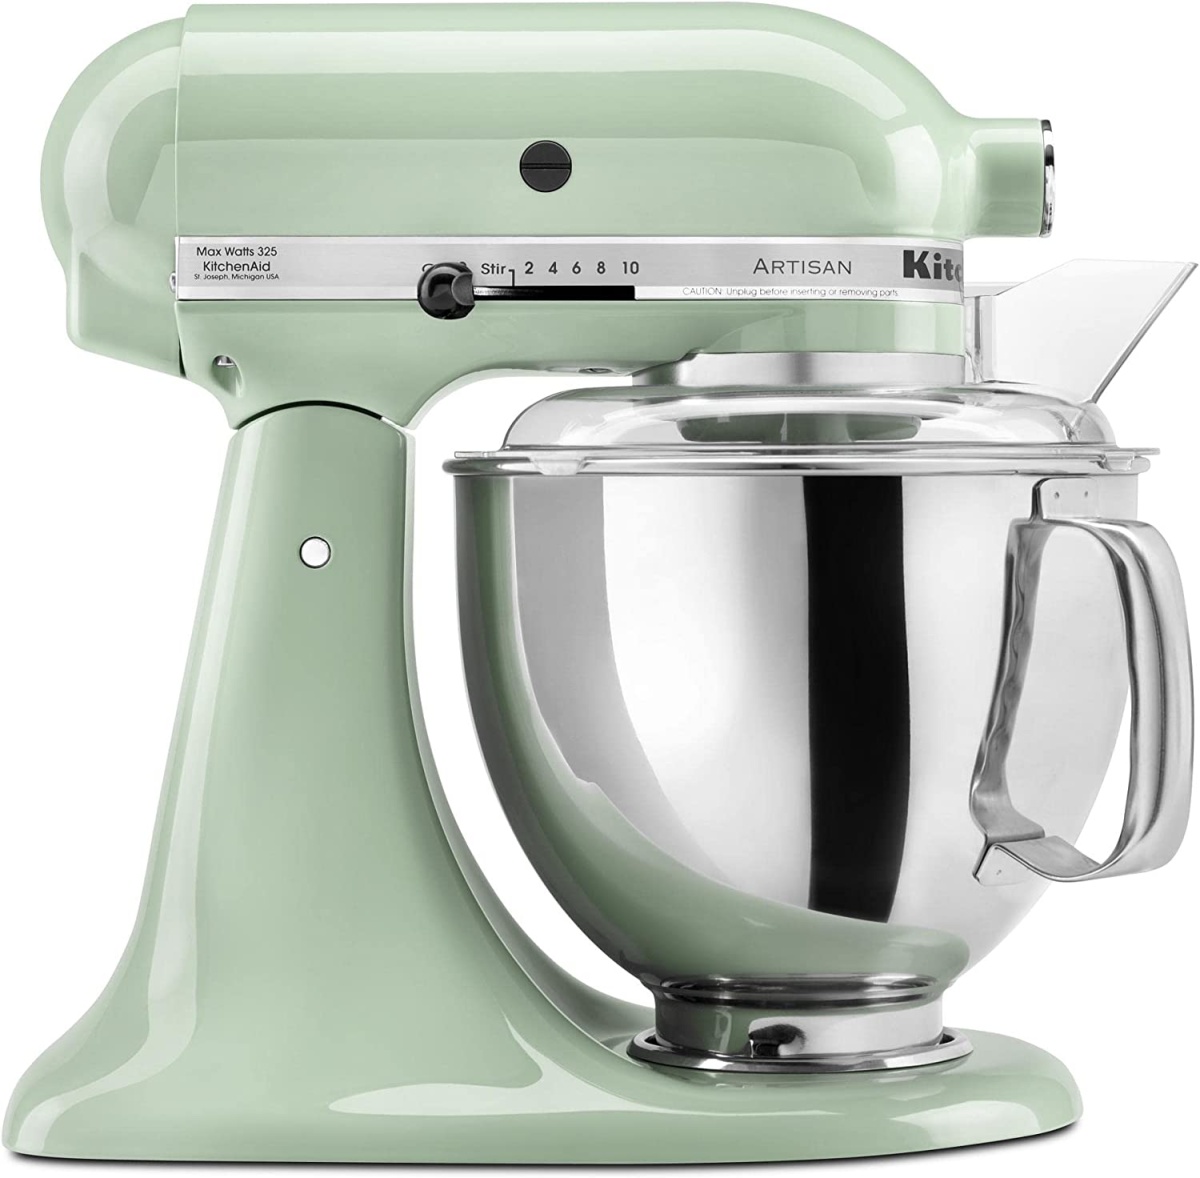 Aucma Stand Mixer review: Can this $150 PLASTIC  mixer really be any  good? 